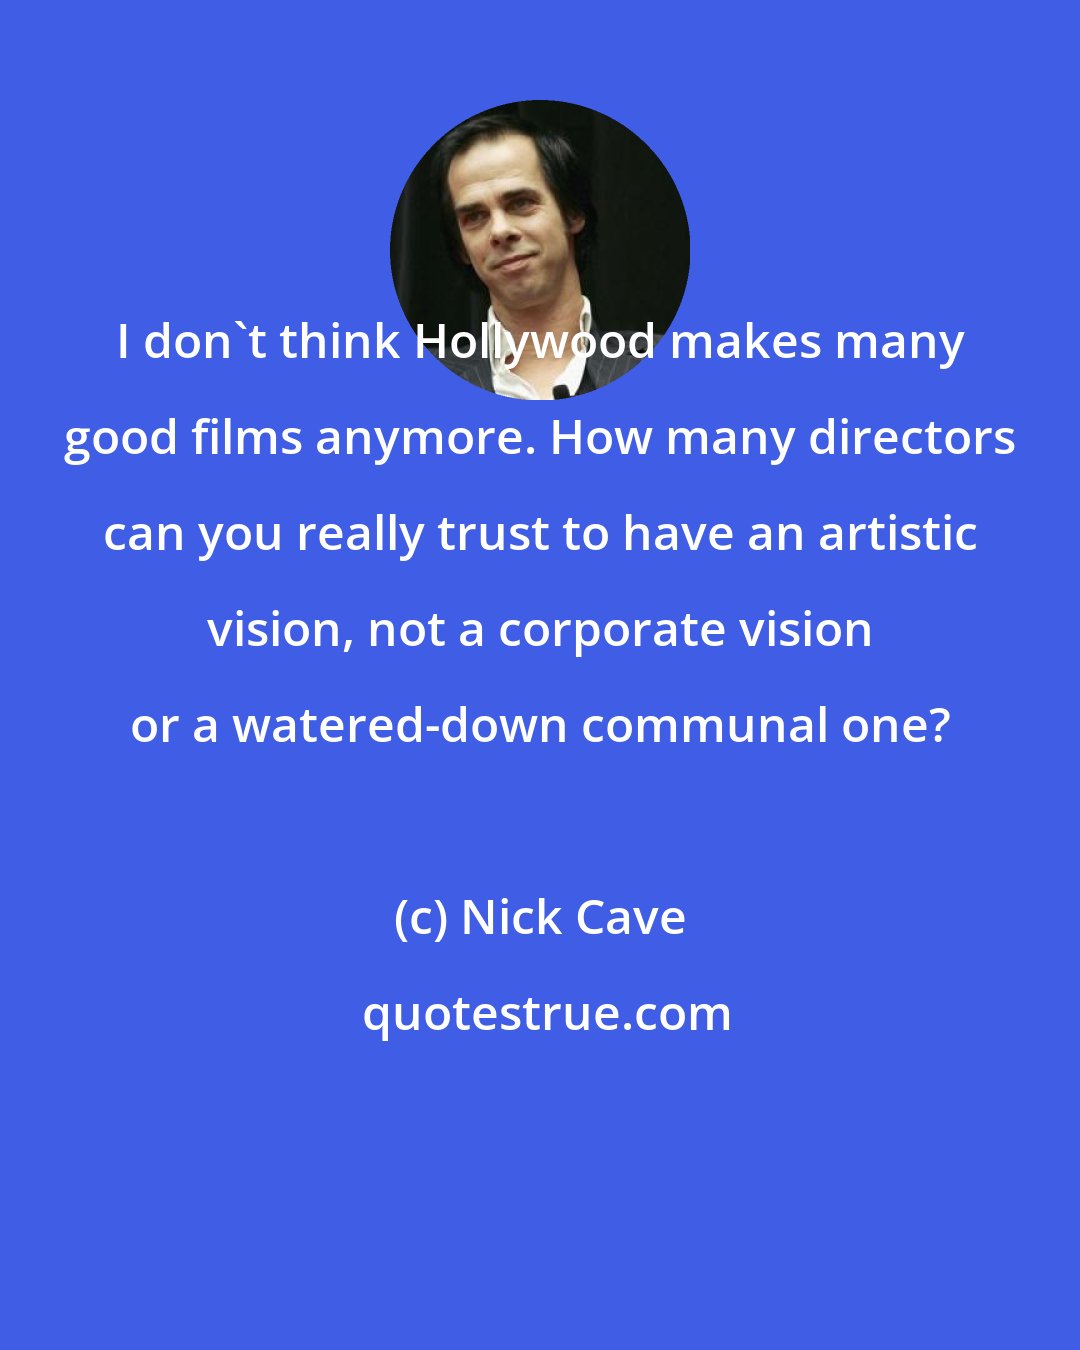 Nick Cave: I don't think Hollywood makes many good films anymore. How many directors can you really trust to have an artistic vision, not a corporate vision or a watered-down communal one?